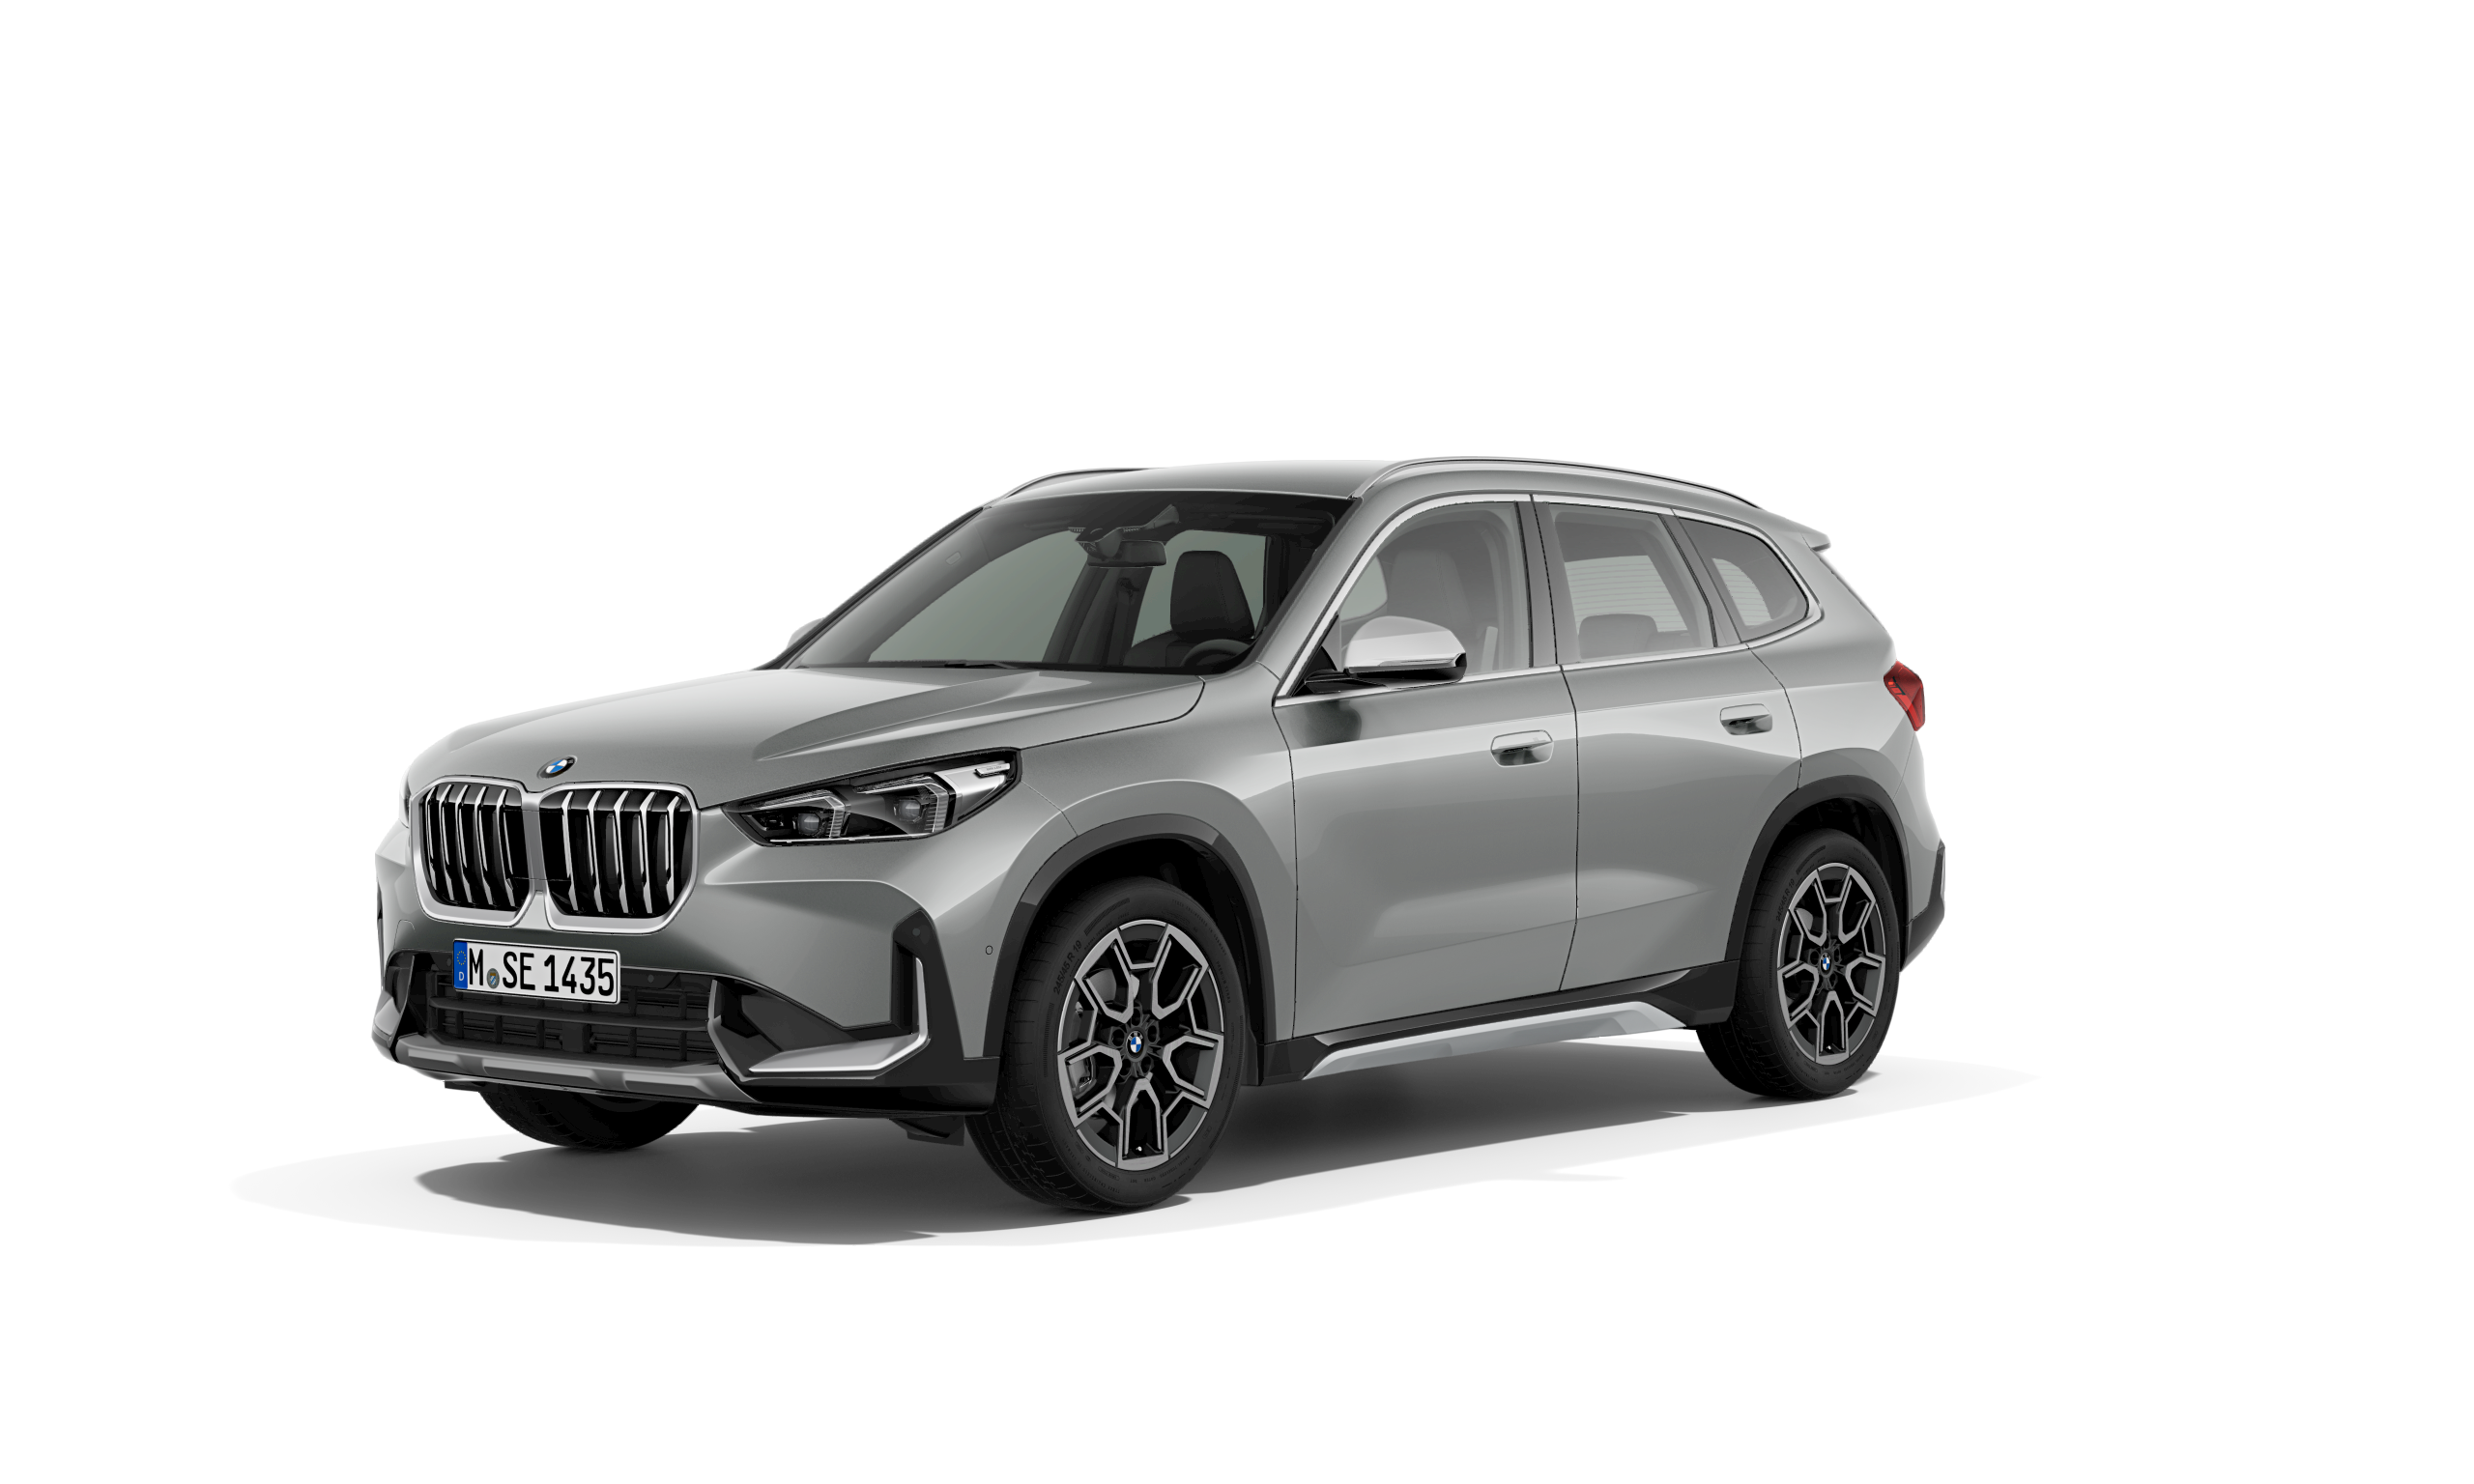 02. The New BMW X1 sDrive20i xLine Space Silver